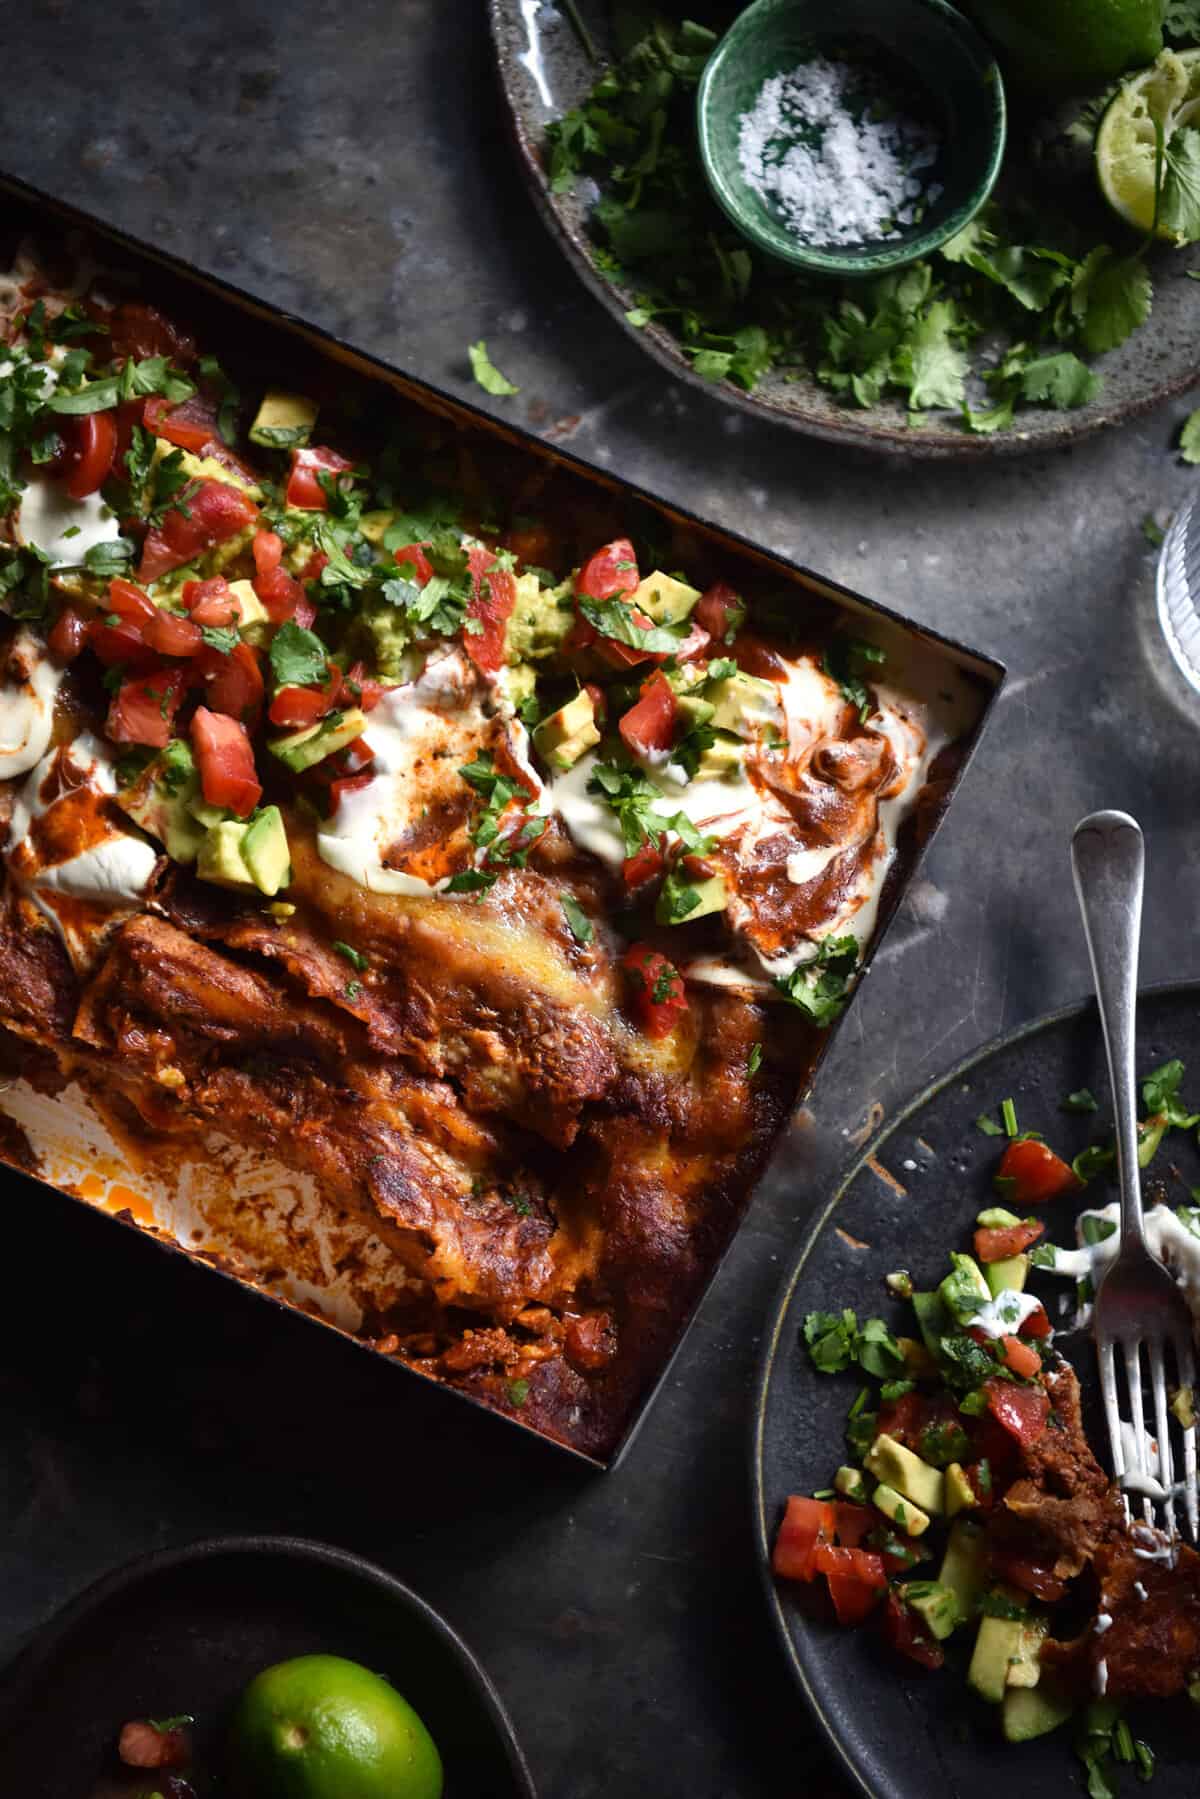 An aerial view of a tray of vegetarian, FODMAP friendly enchiladas topped with sour cream and a tomato, avocado and coriander salsa. The tray sits at an angle on a dark backdrop and is surrounded by dark ceramic plates topped with enchiladas or seasonings and lime wedges.